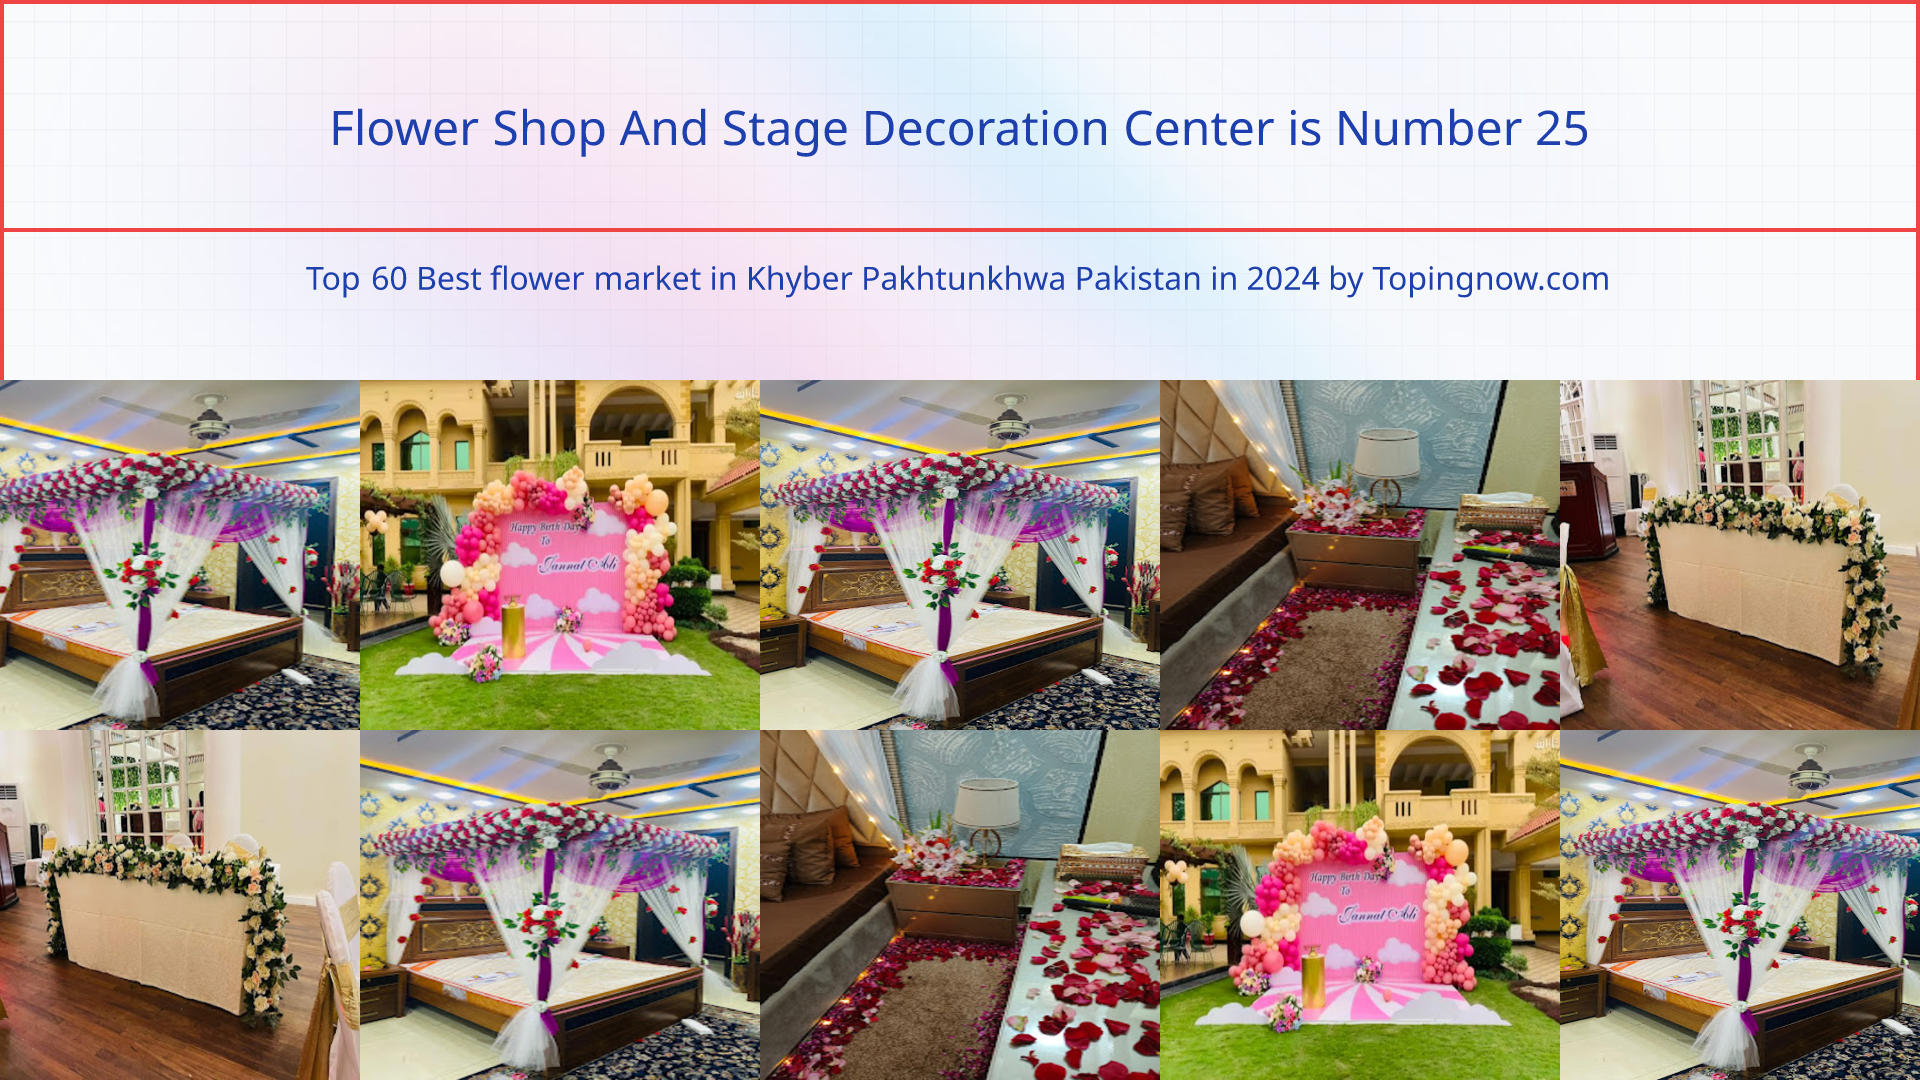 Flower Shop And Stage Decoration Center: Top 60 Best flower market in Khyber Pakhtunkhwa Pakistan in 2024